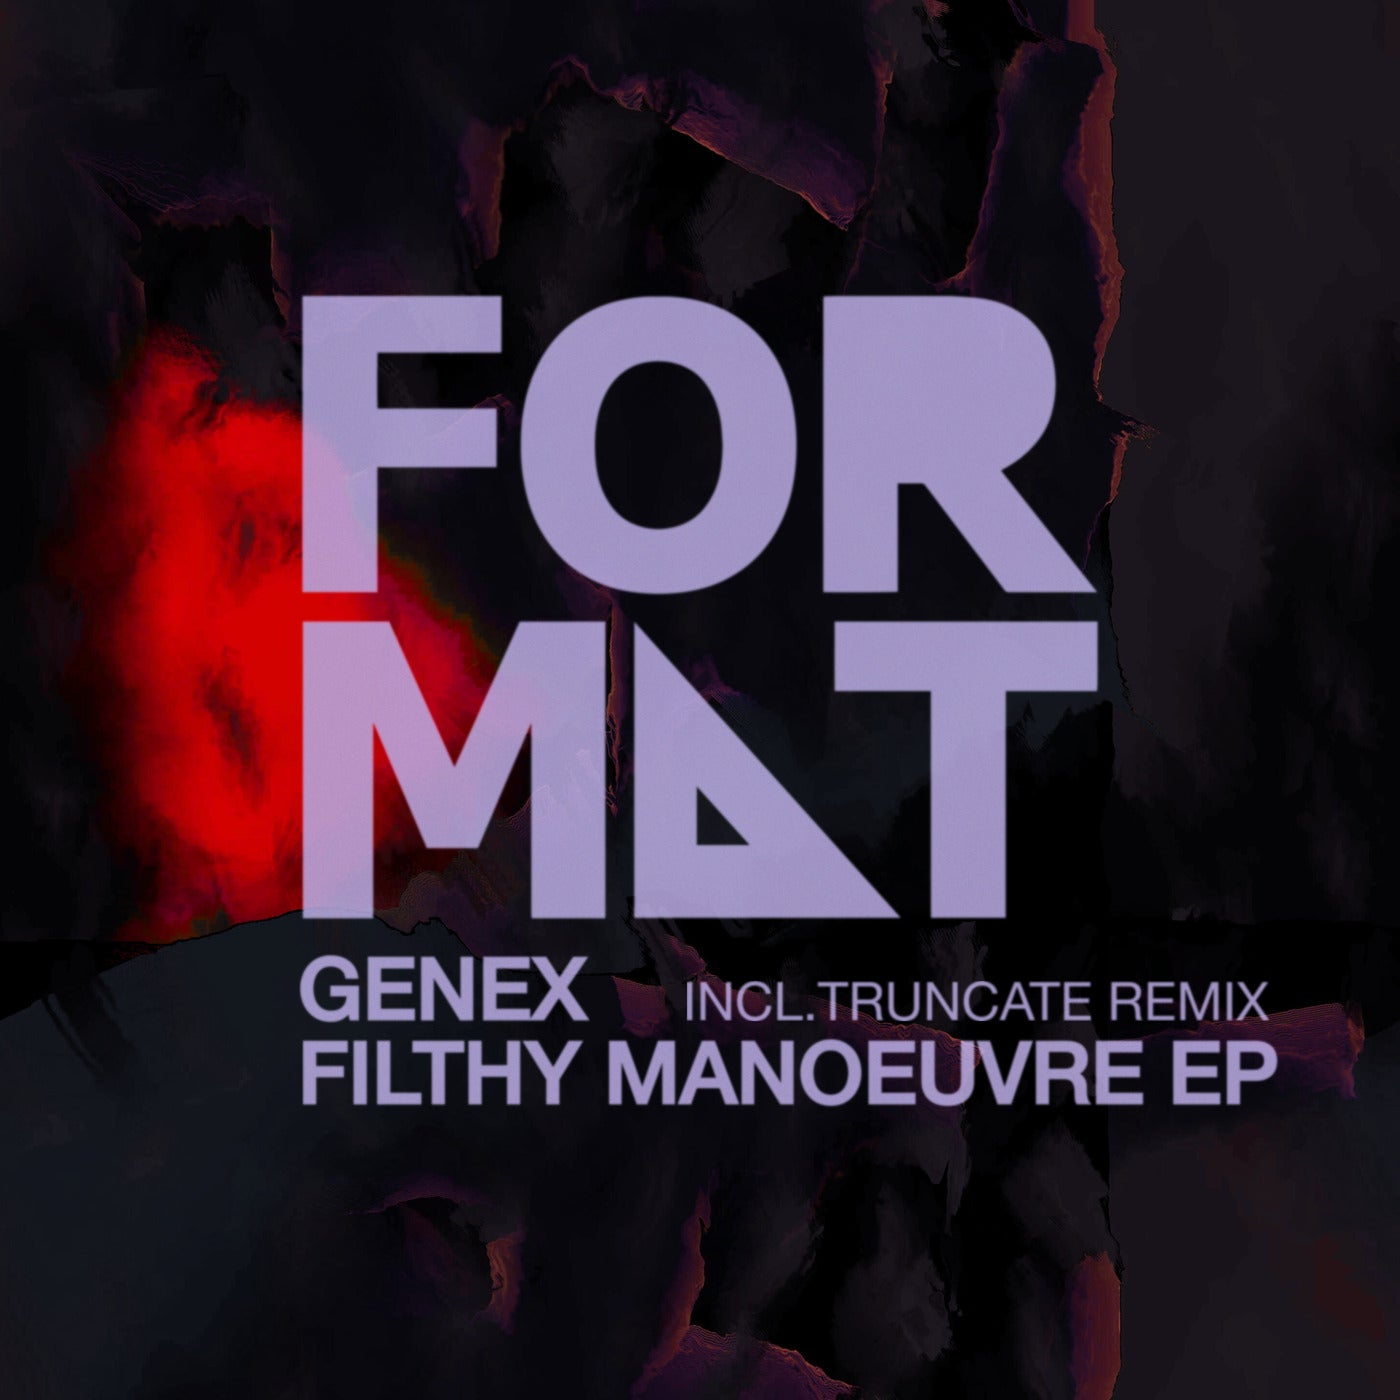 Filthy Manoeuvre EP incl. Truncate Remix